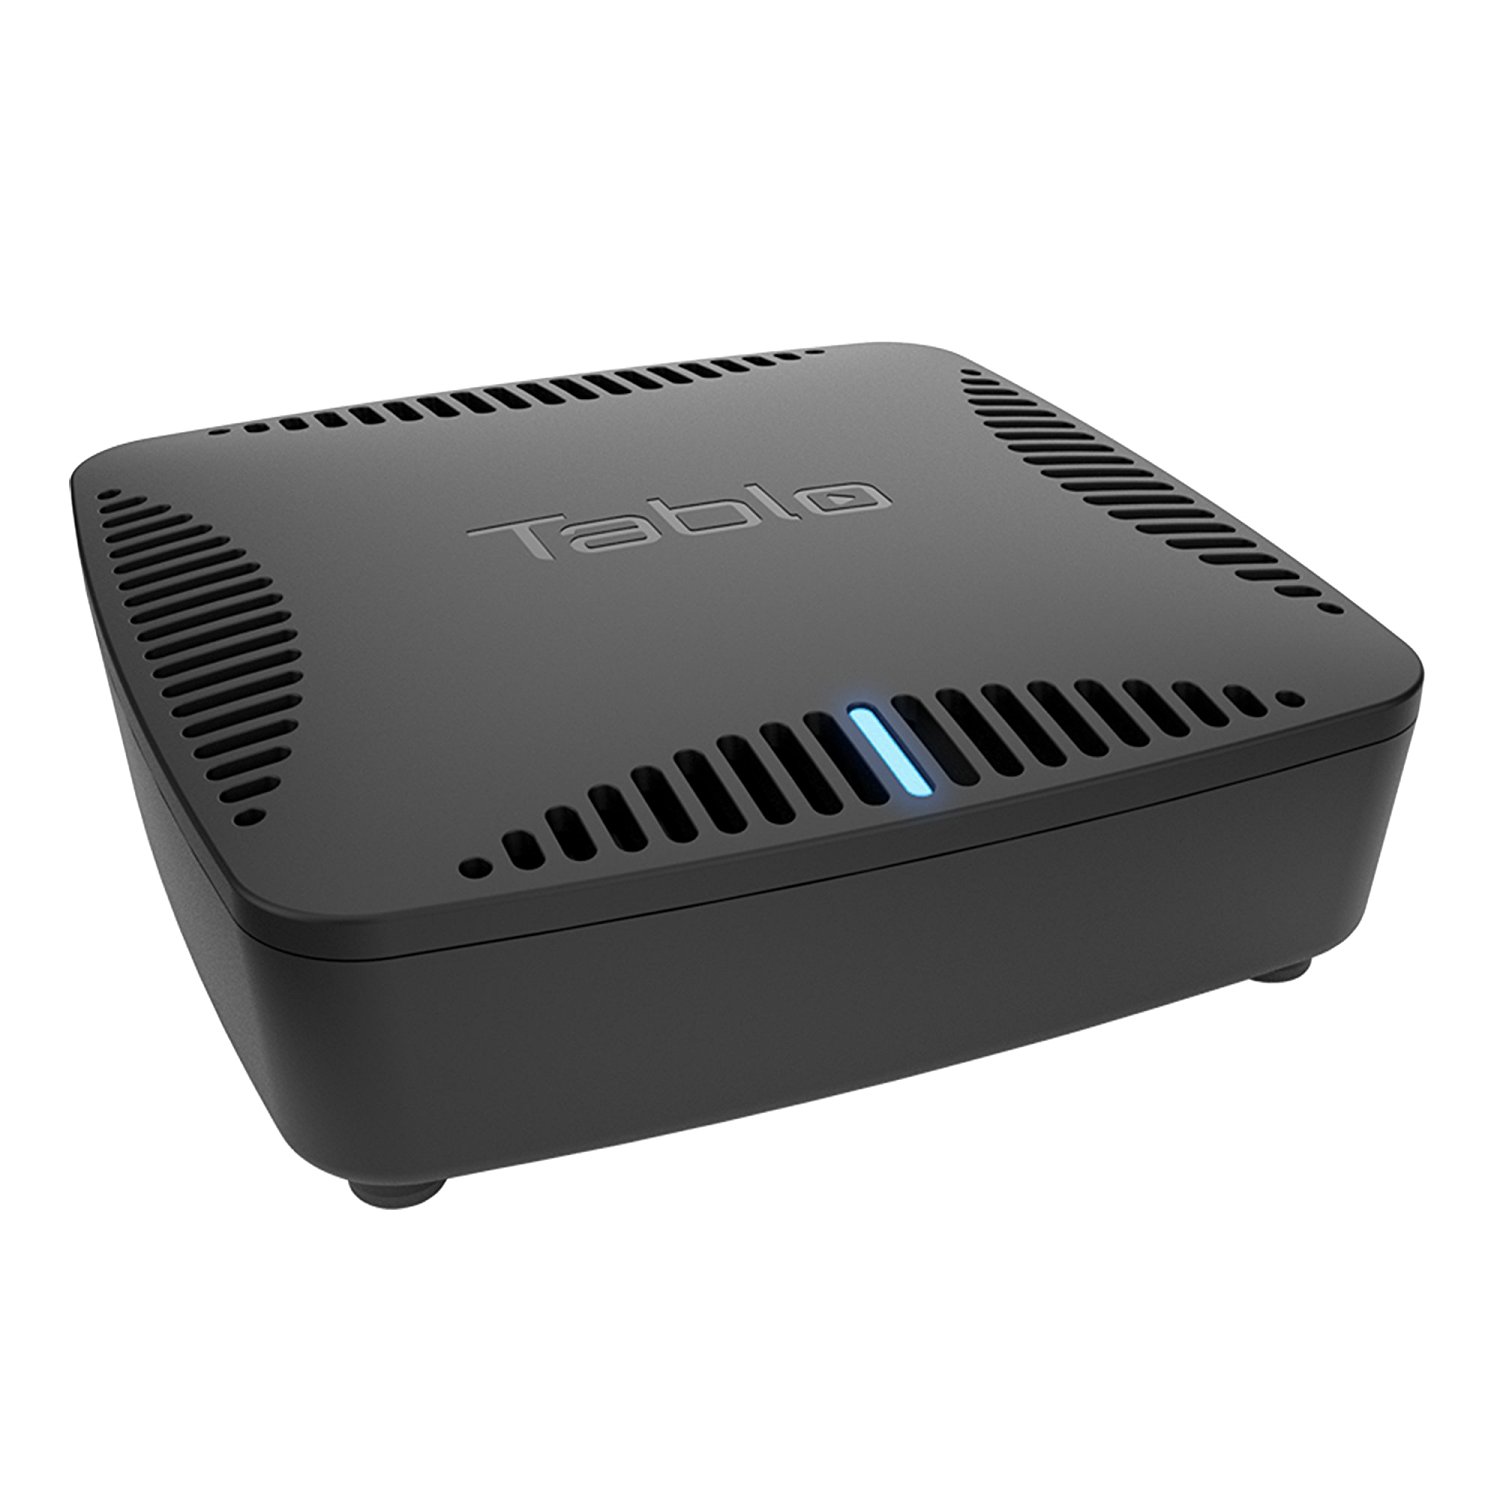 Get a Tablo Dual Lite for $99.99 (Normally $149.99)